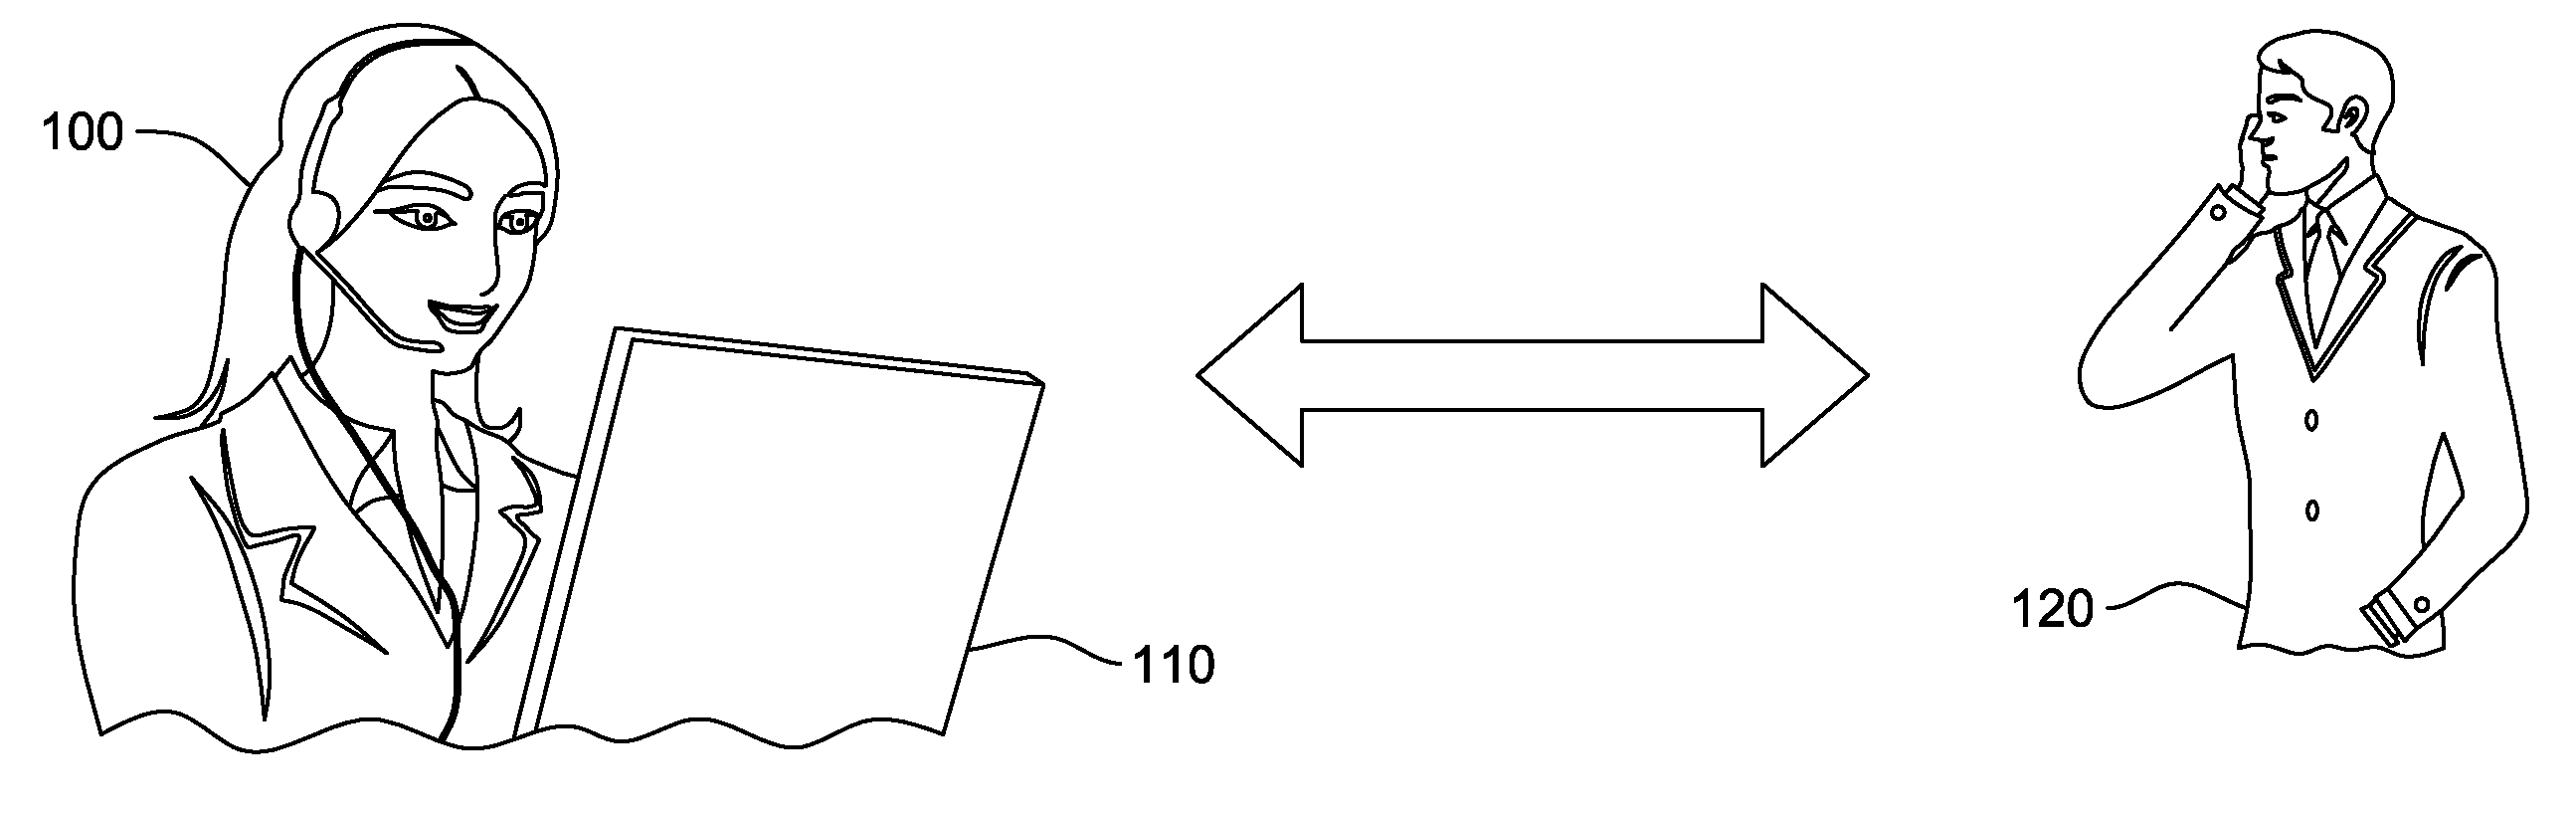 Method for reducing errors while transferring tokens to and from people